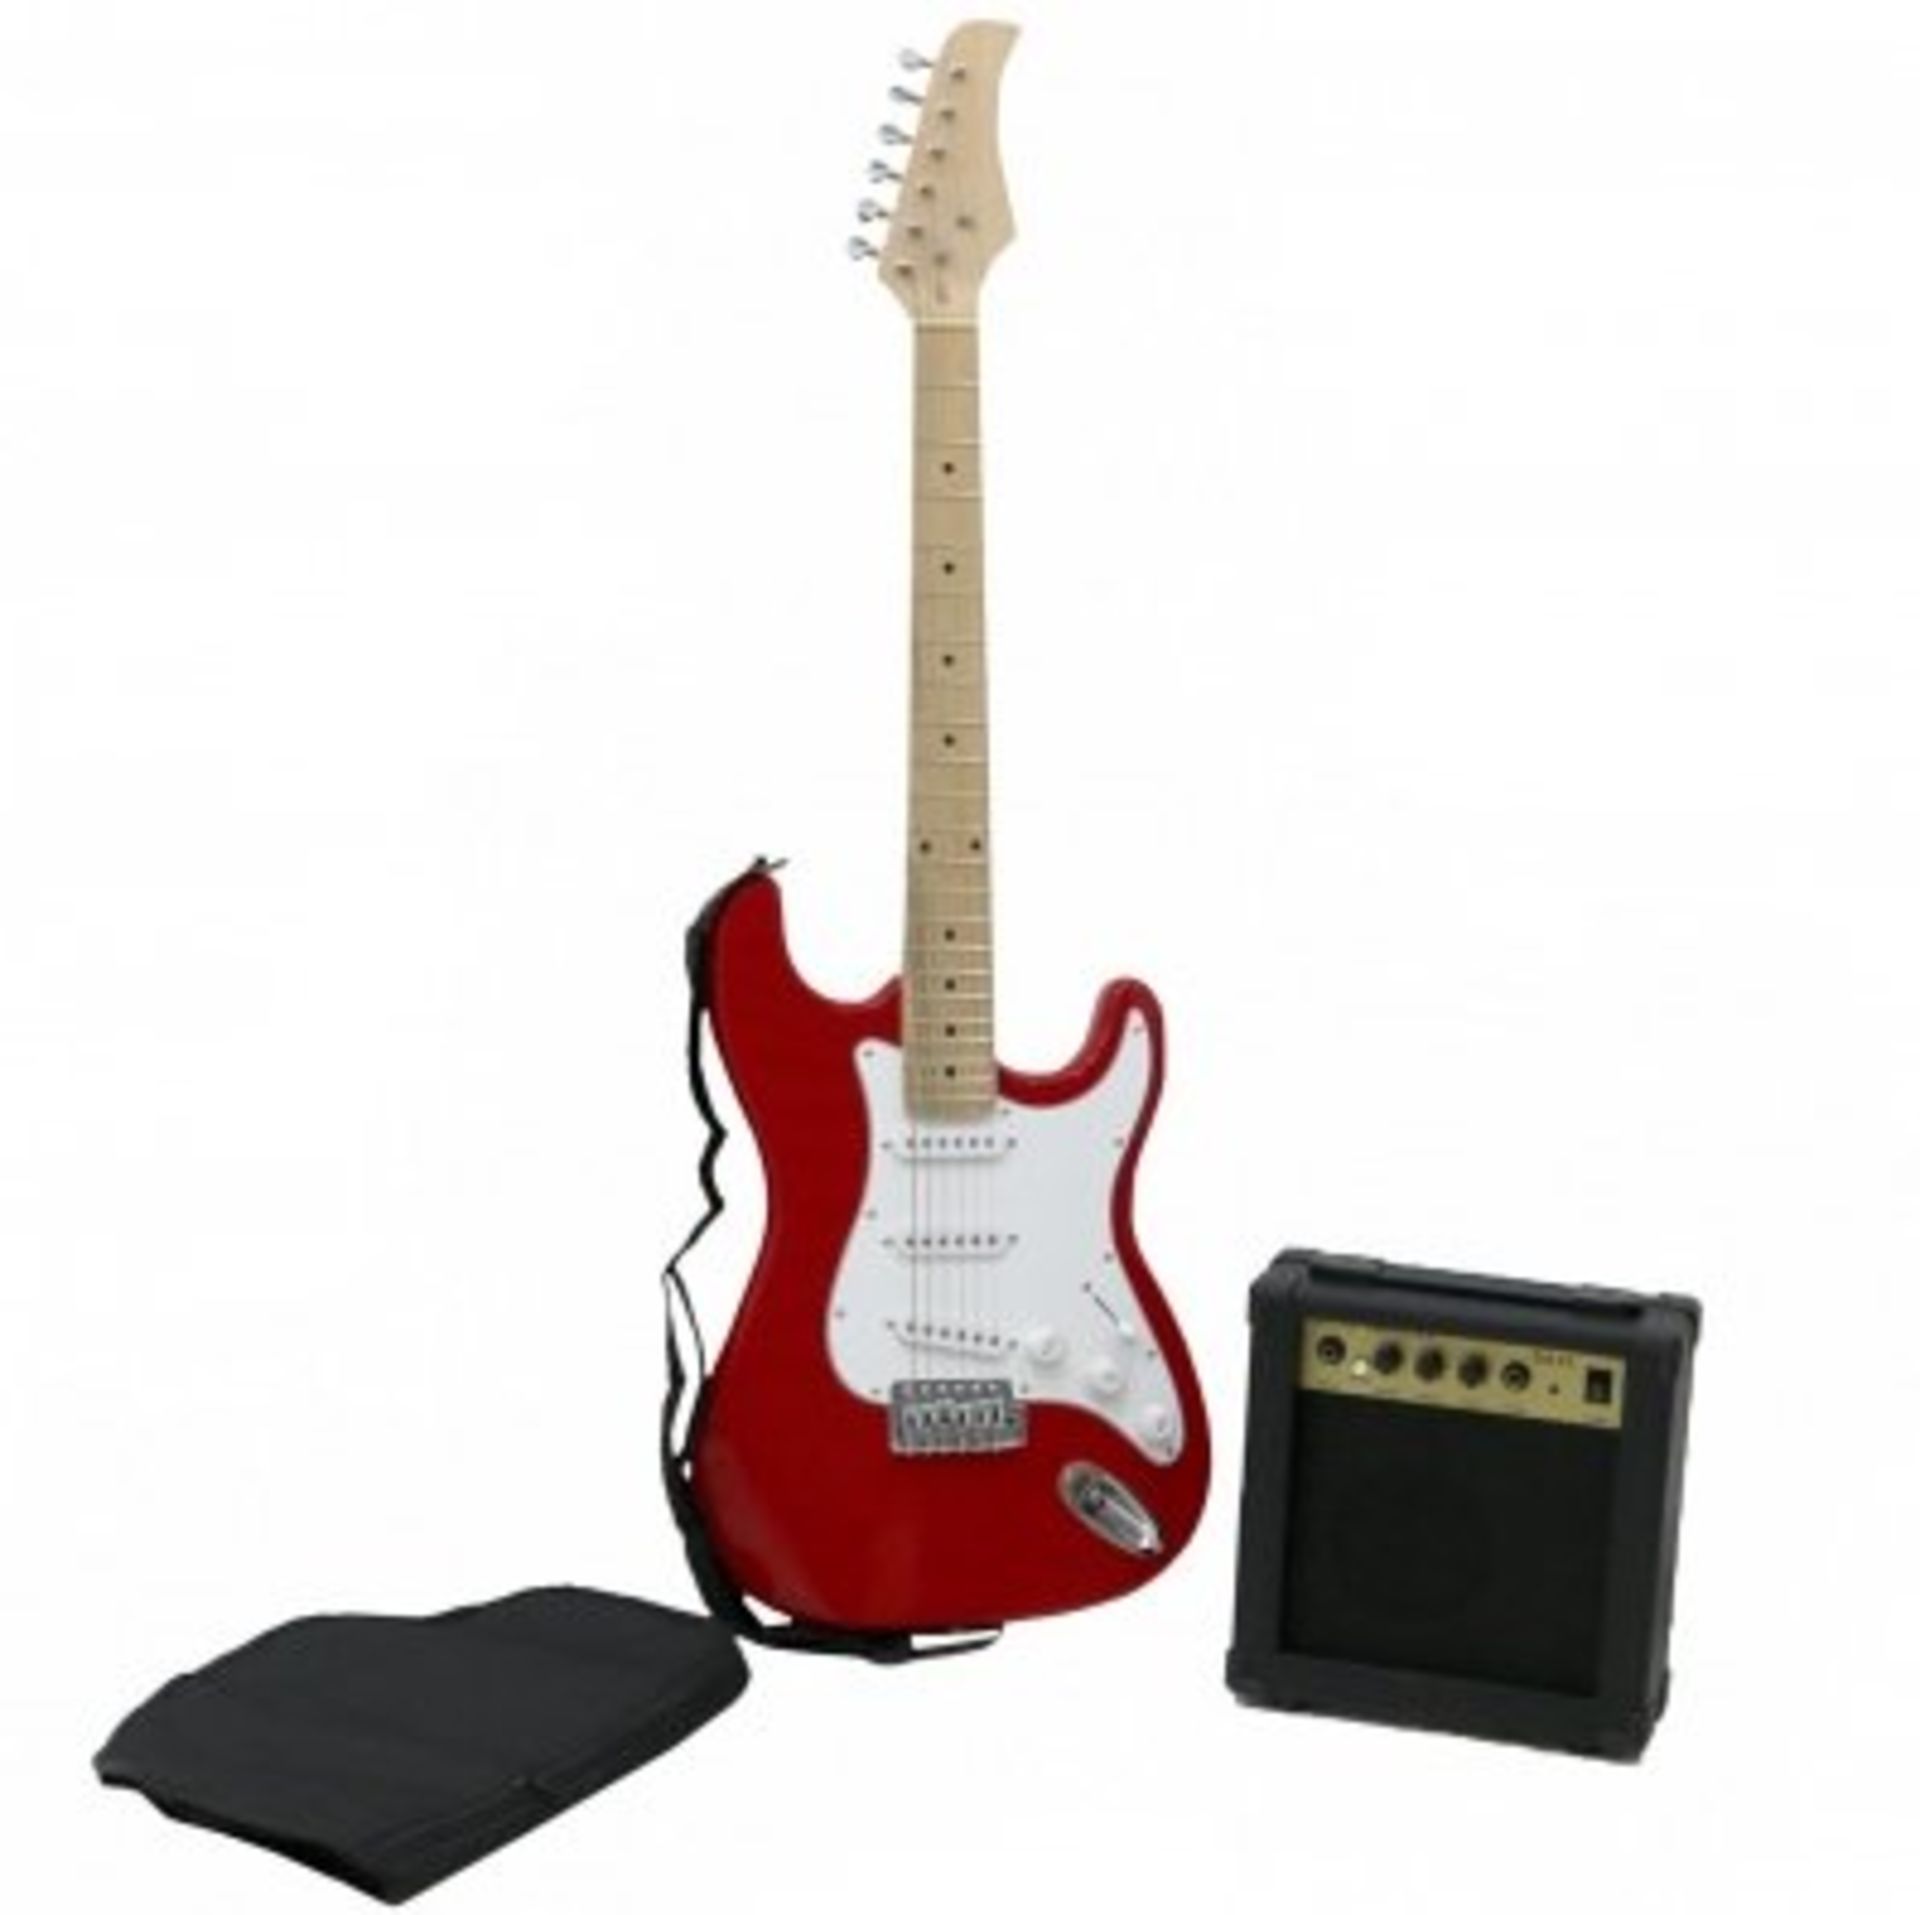 (EE472) The ST is a stratocaster-style electric guitar at an incredible price - great for seaso...